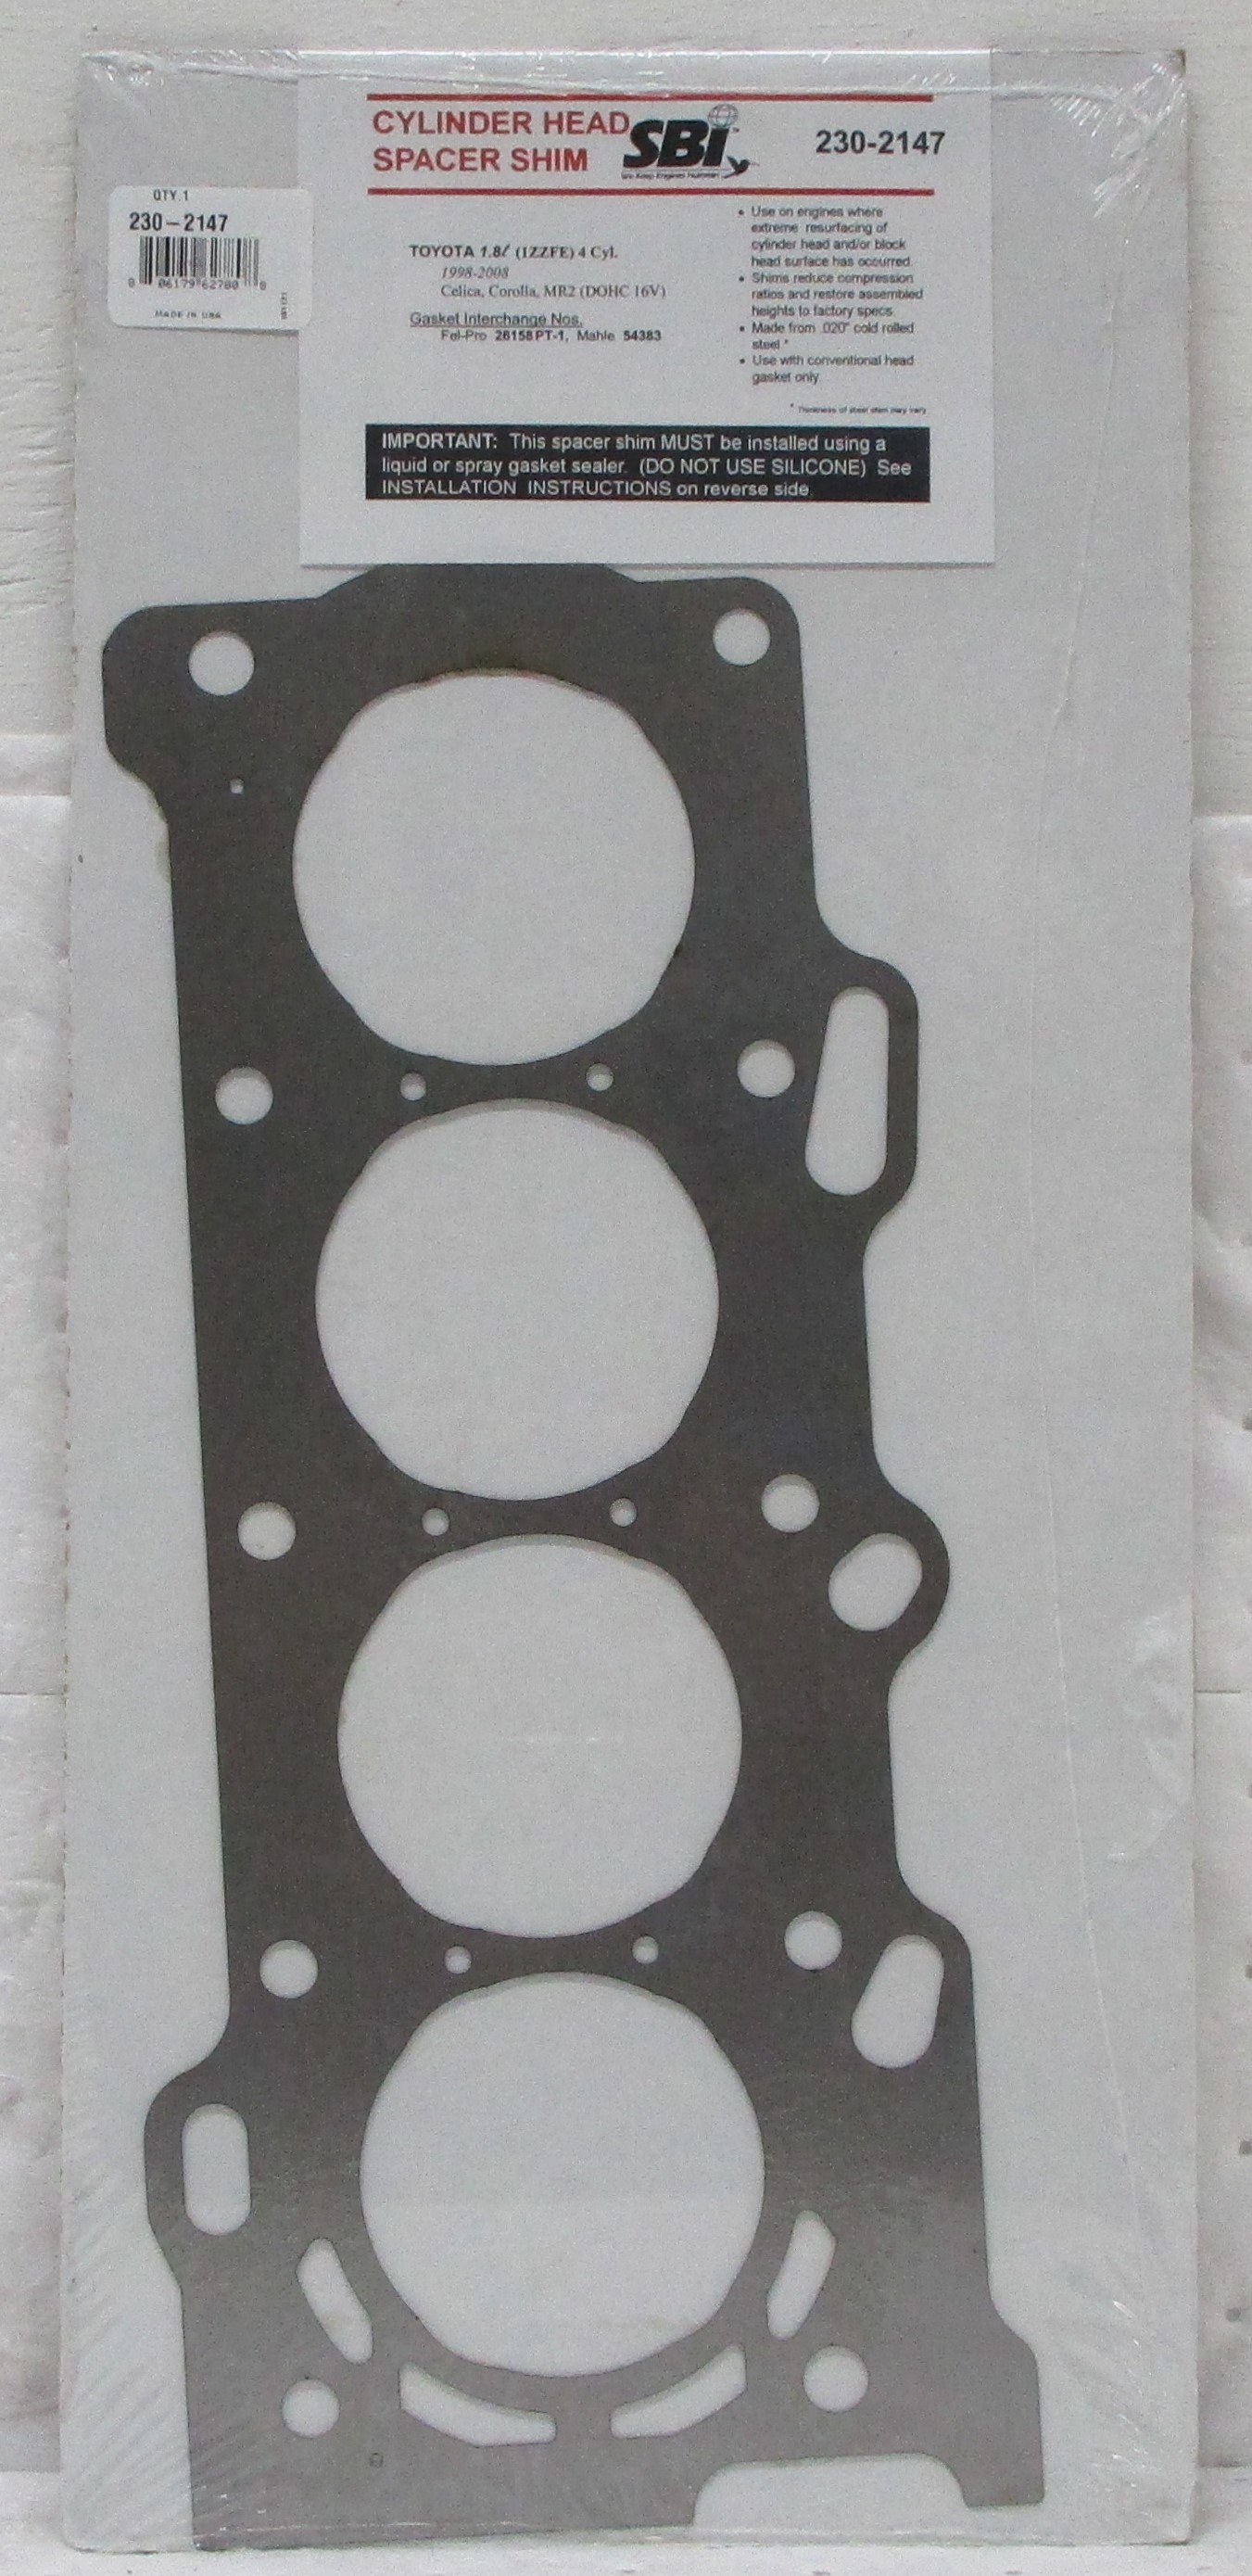 Cylinder Head Spacer Shim Compatible with : GM - Chevrolet 2.2L (134) 4Cyl. 1994-2003 Chevrolet Truck - 1998-200 Chevrolet Pass Car